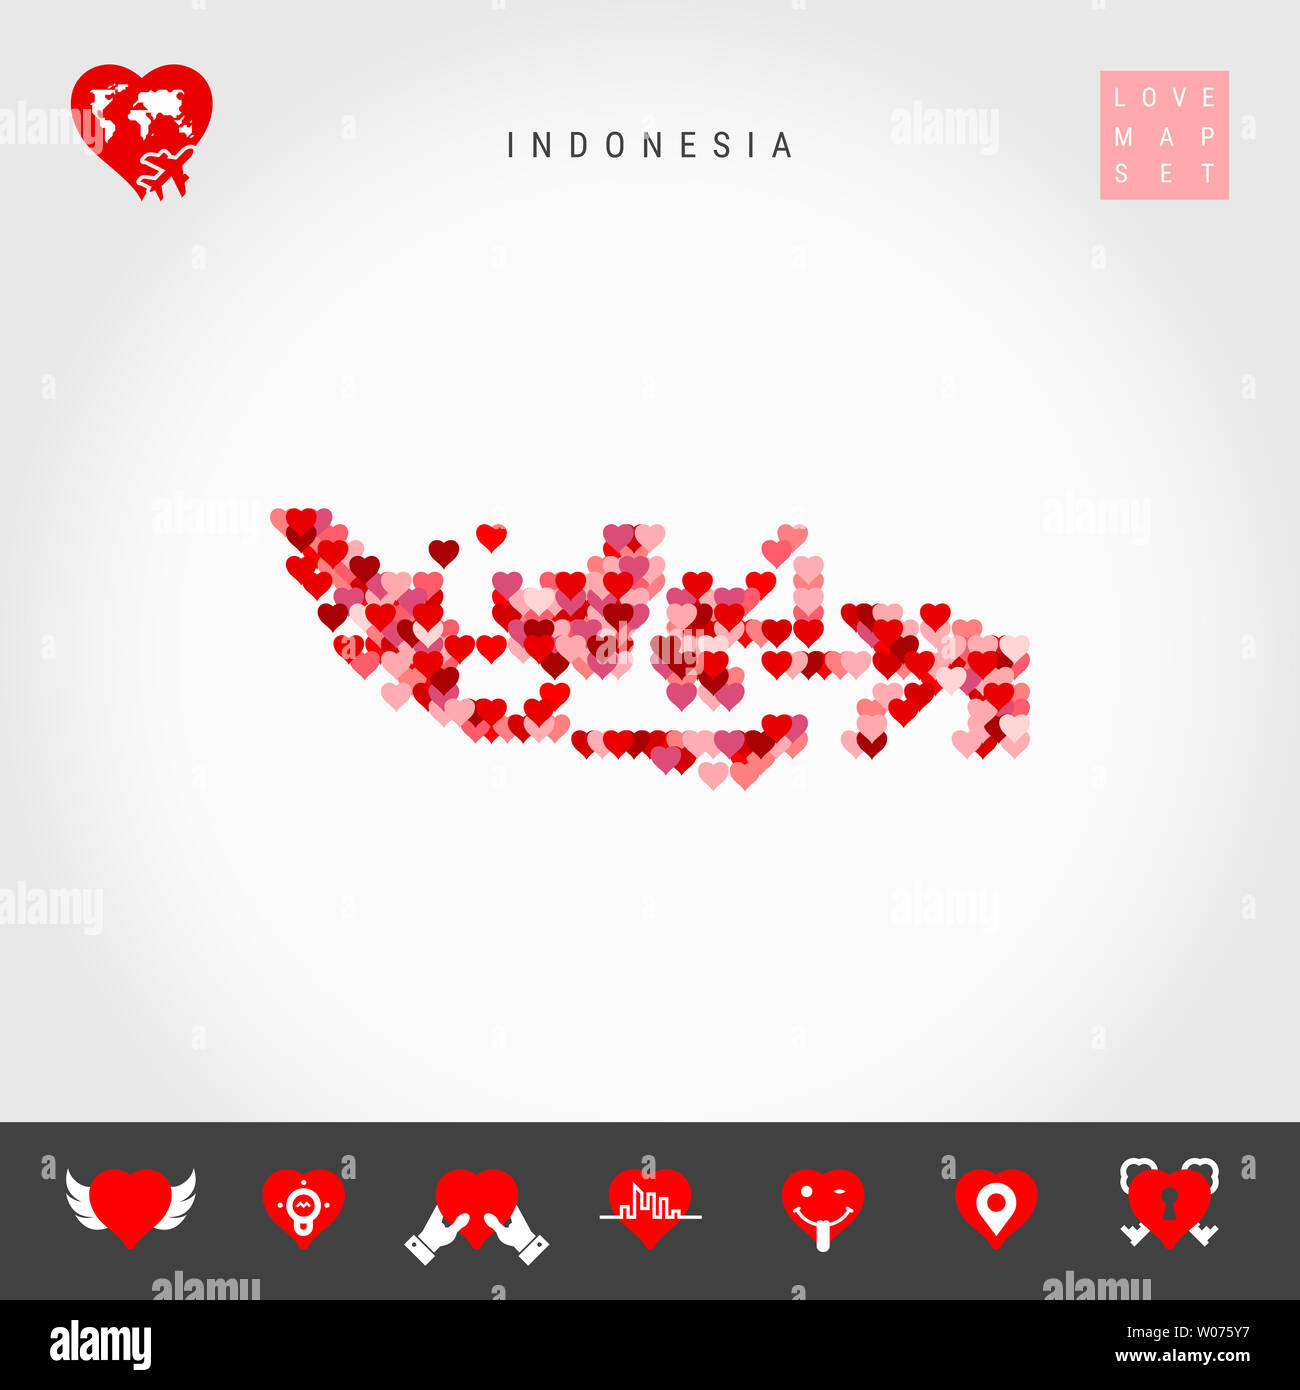 I Love Indonesia. Red and Pink Hearts Pattern Map of Indonesia Isolated on Grey Background. Love Icon Set. Stock Photo